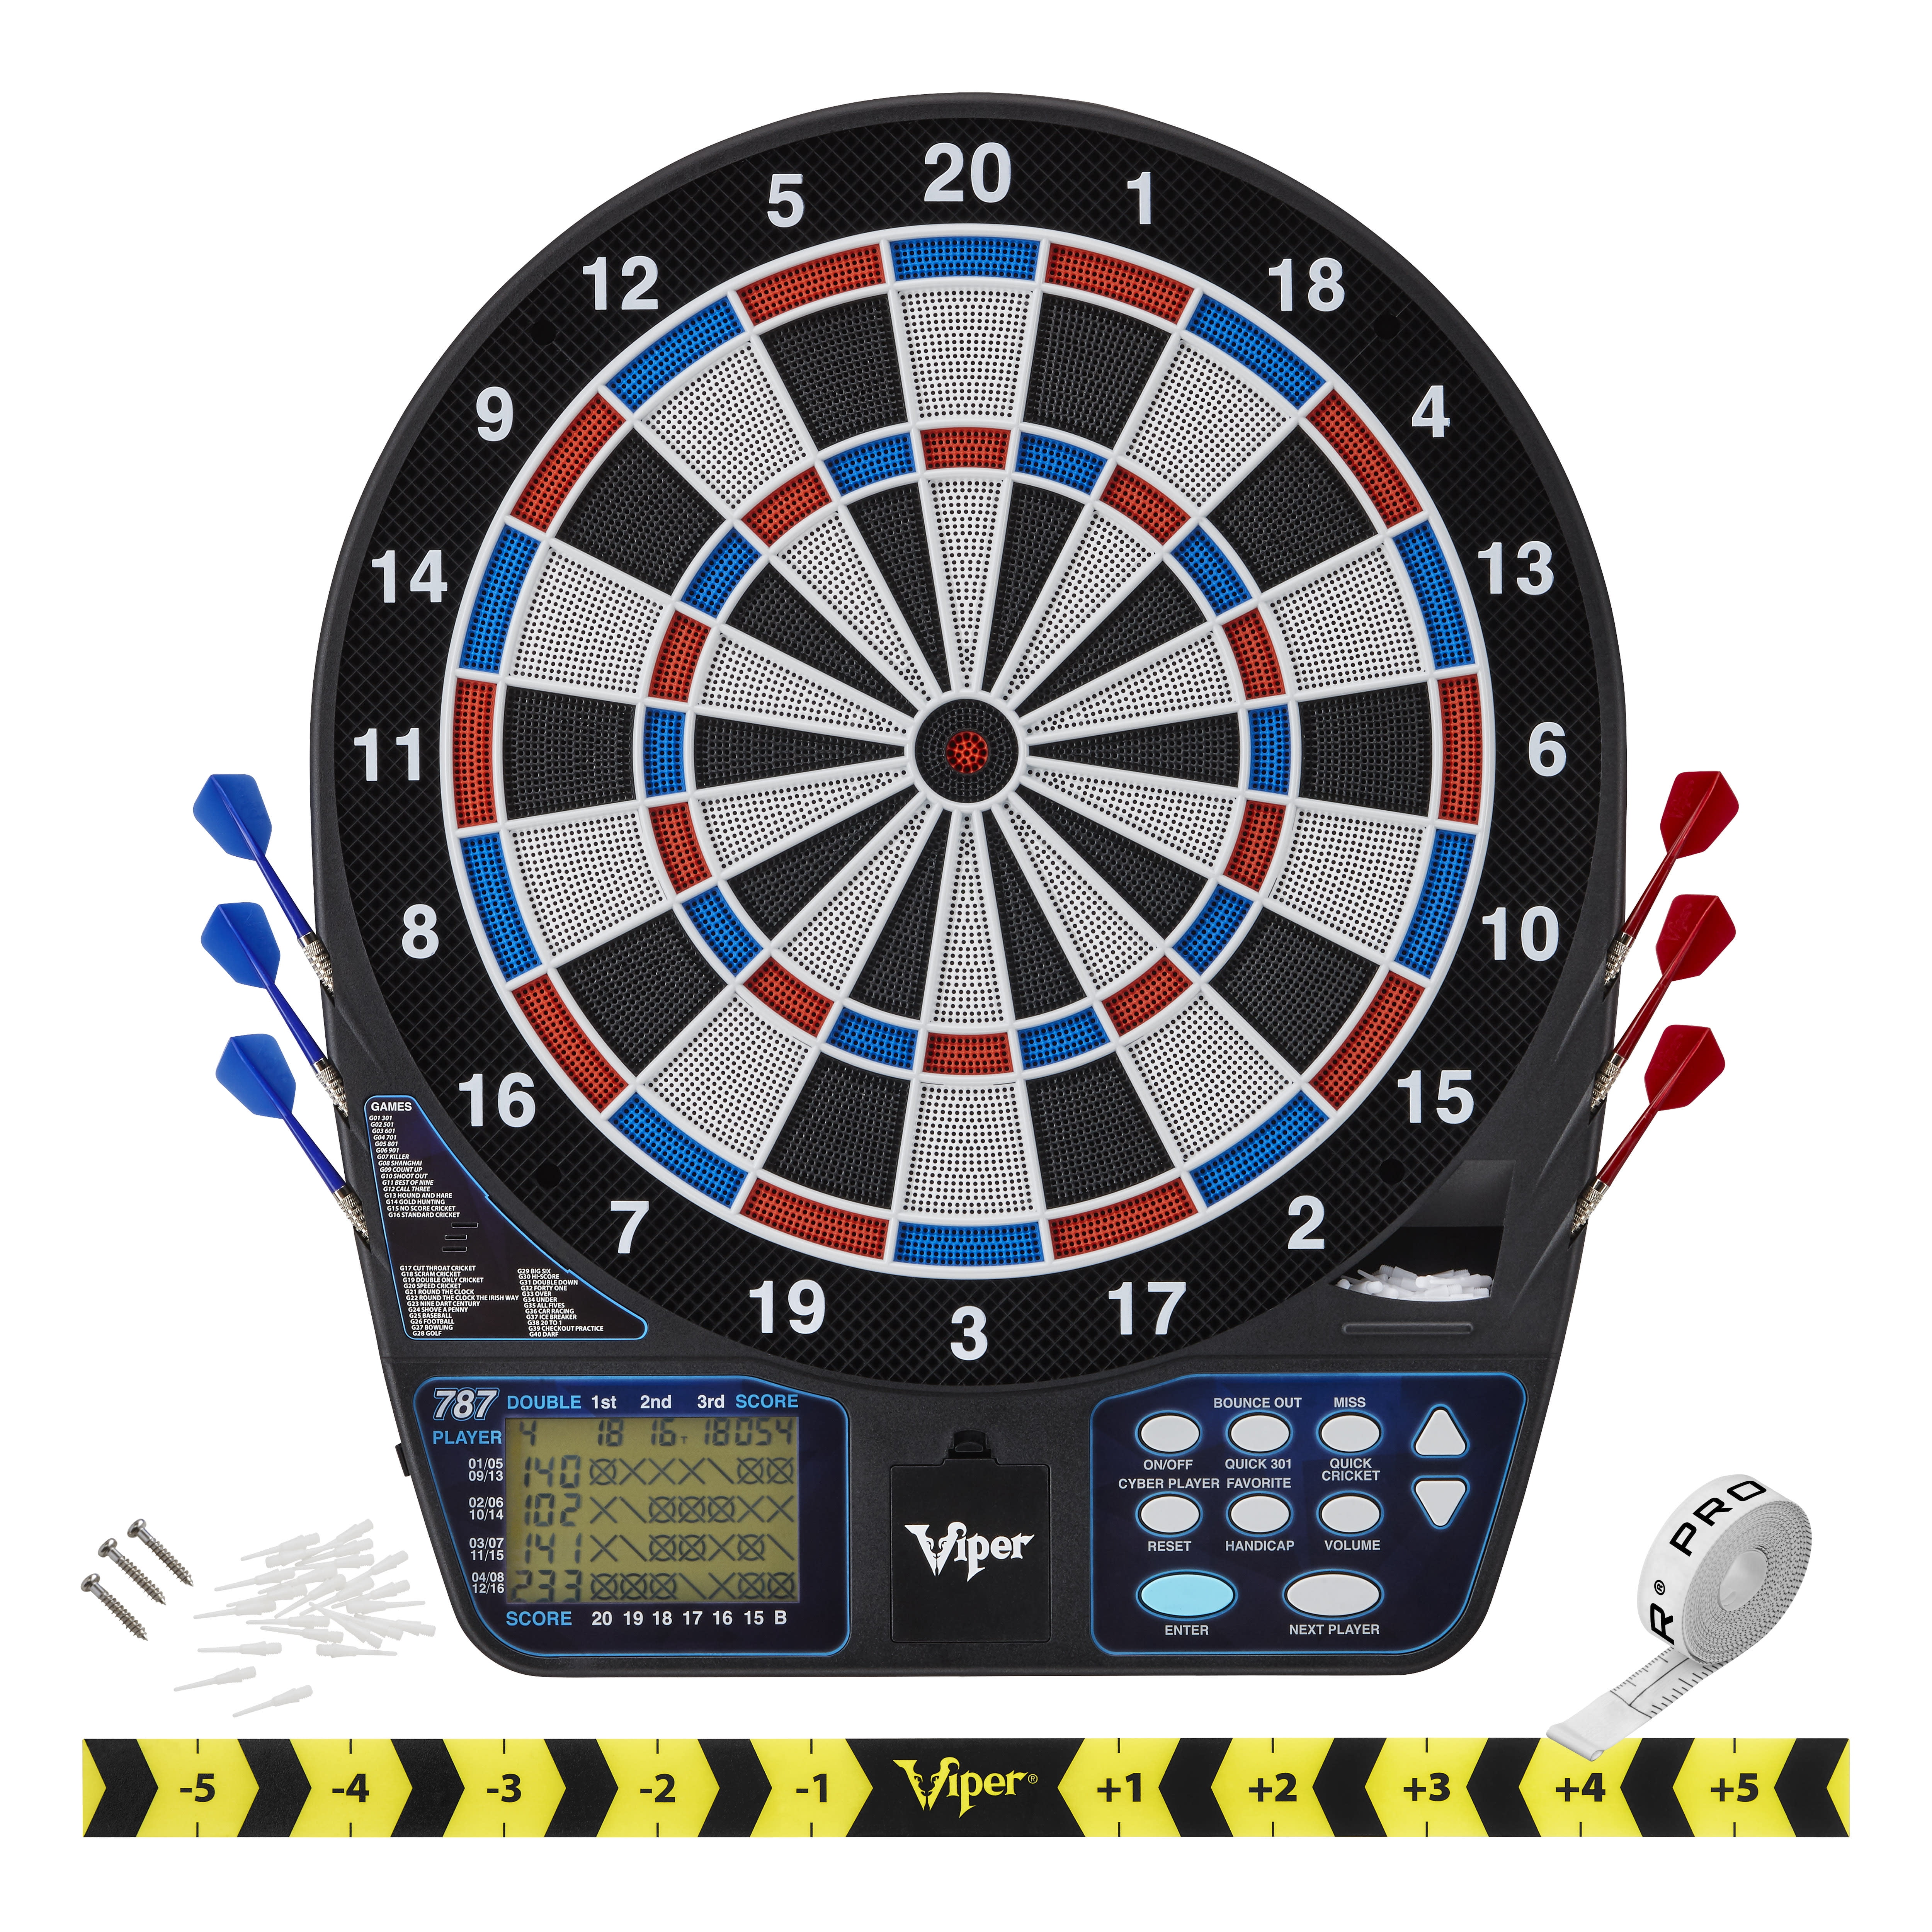  UNICORN Dartboard with 6 Darts, Checkout, Entry Level  Bristle Board for Adults